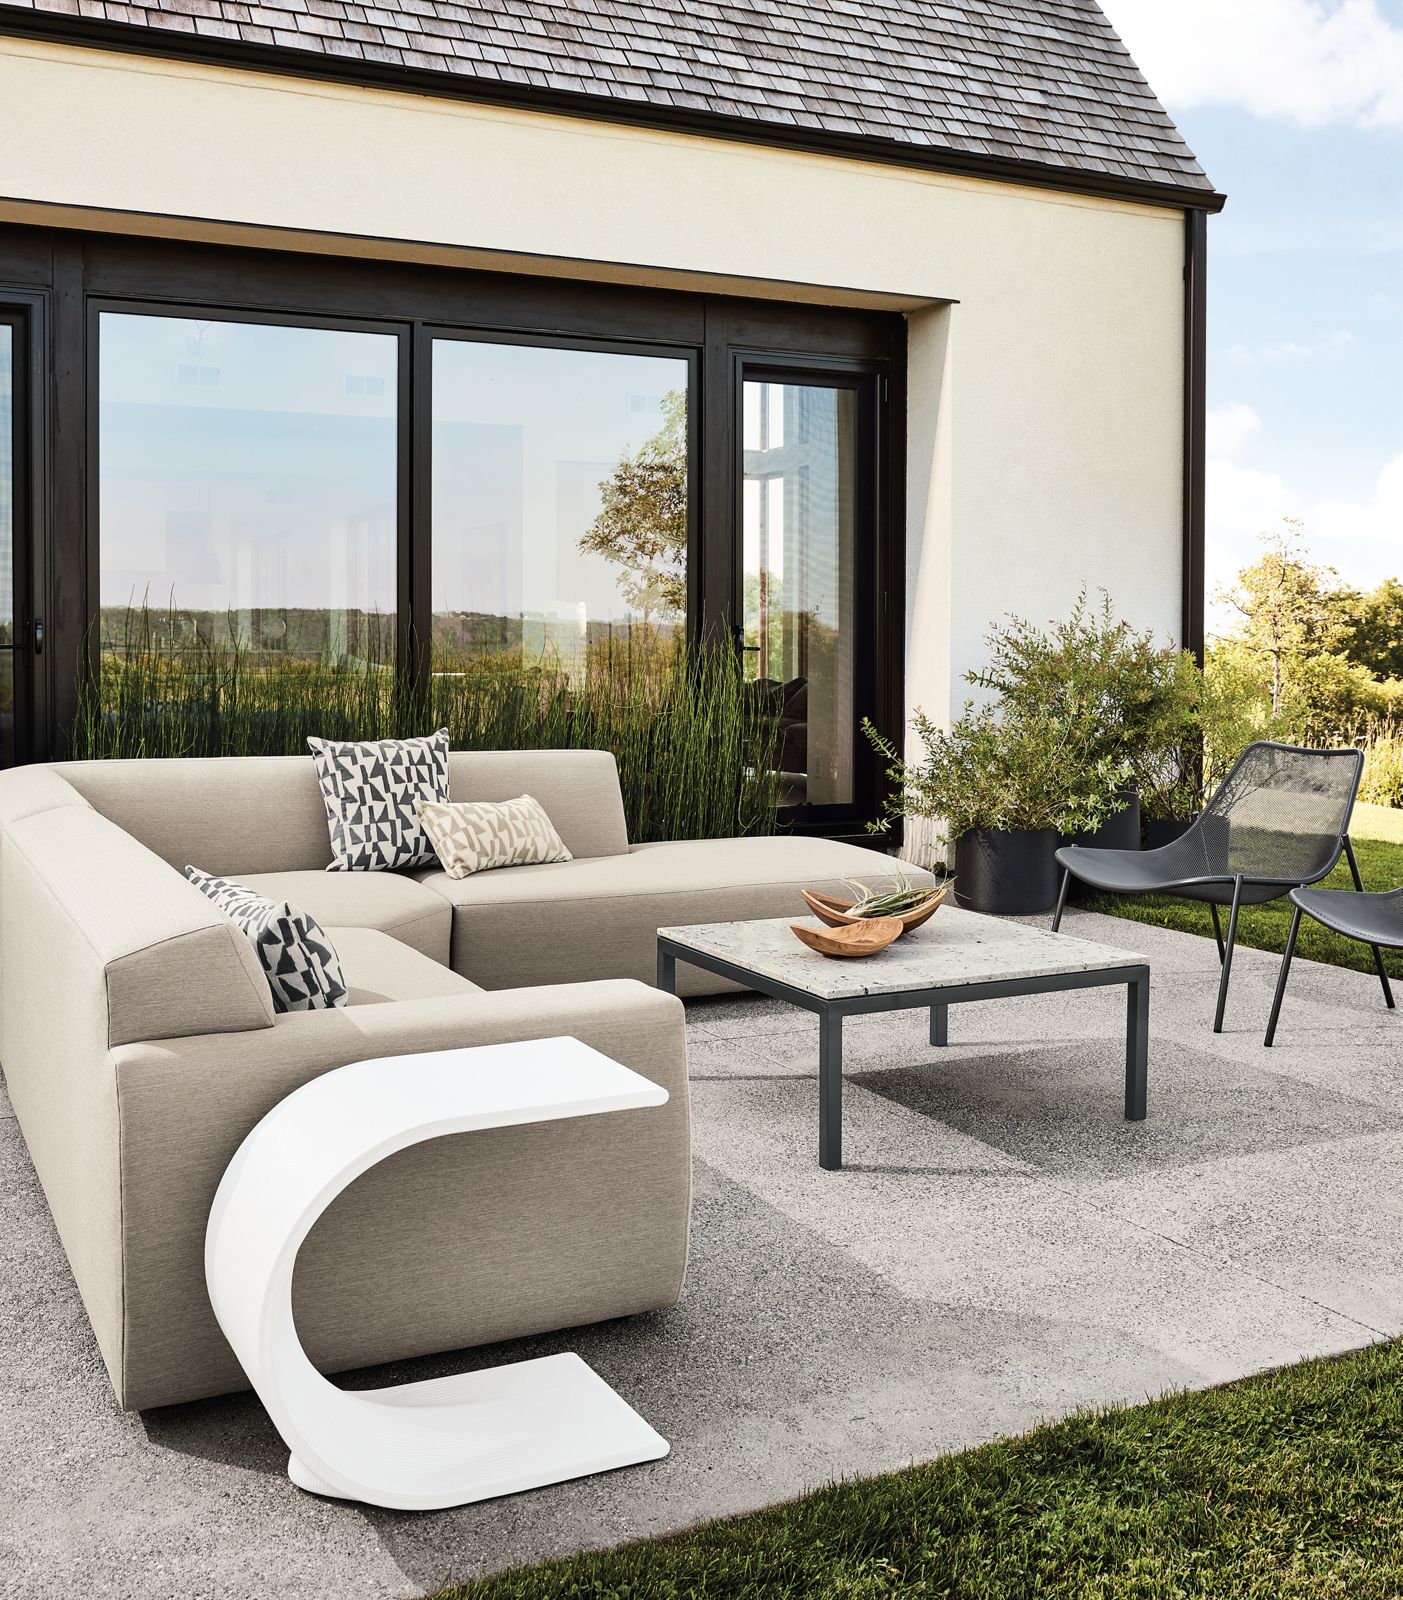 Drift outdoor sectional in Pelham Cement fabric, Tangent c-table in white, Soleil chairs and Parsons coffee table.